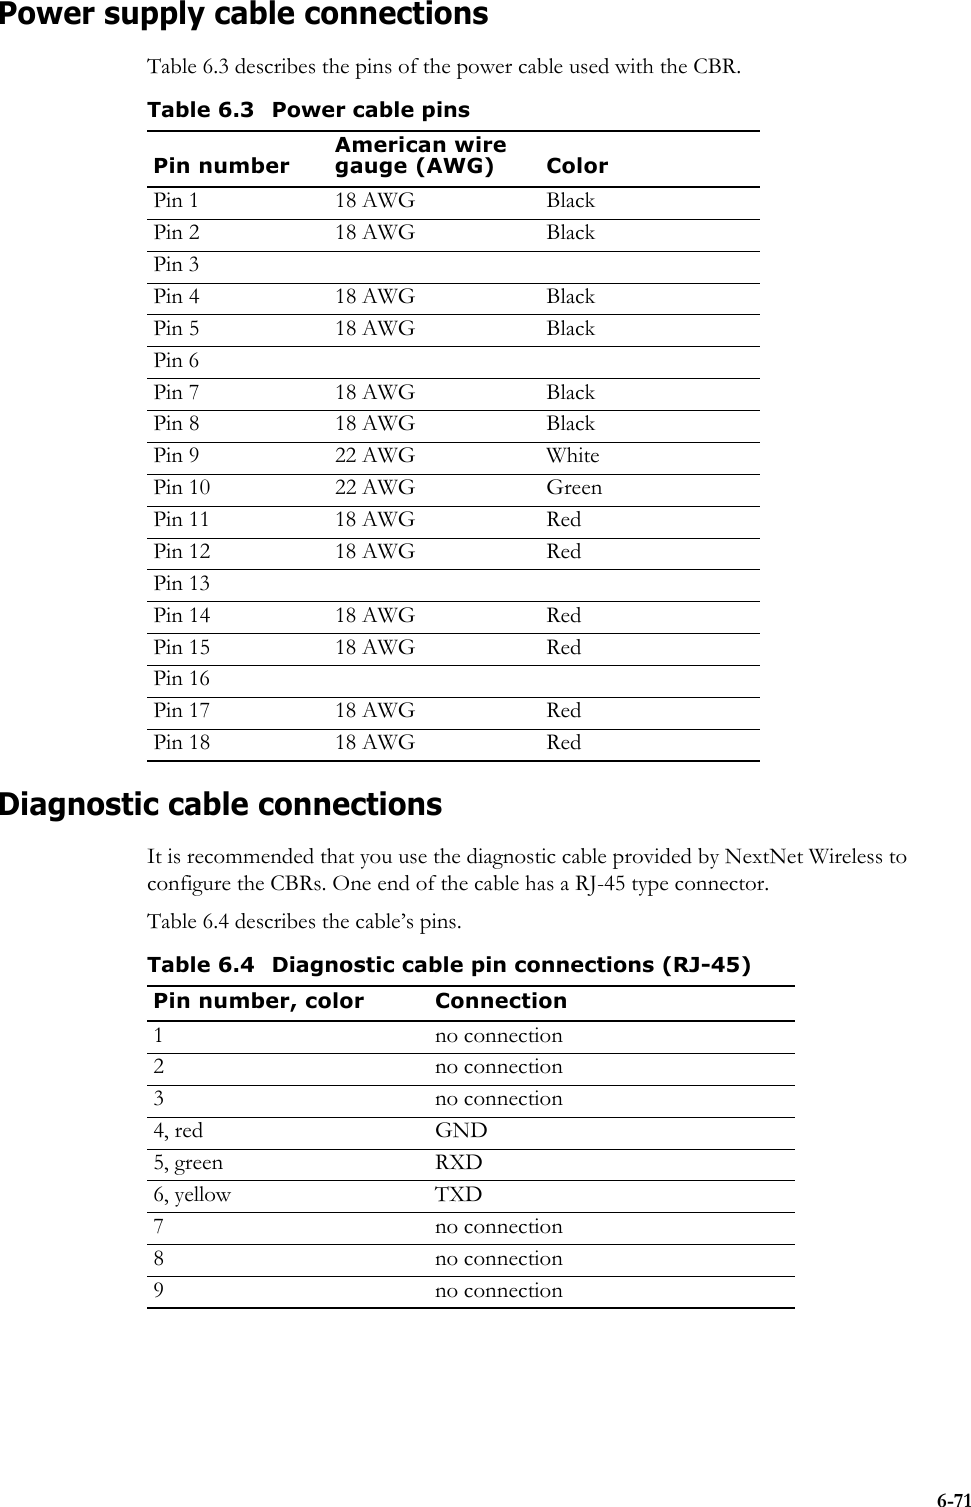 6-71Power supply cable connectionsTable 6.3 describes the pins of the power cable used with the CBR.Diagnostic cable connectionsIt is recommended that you use the diagnostic cable provided by NextNet Wireless to configure the CBRs. One end of the cable has a RJ-45 type connector.Table 6.4 describes the cable’s pins.Table 6.3 Power cable pinsPin numberAmerican wire gauge (AWG) ColorPin 1 18 AWG BlackPin 2 18 AWG BlackPin 3Pin 4 18 AWG BlackPin 5 18 AWG BlackPin 6Pin 7 18 AWG BlackPin 8 18 AWG BlackPin 9 22 AWG WhitePin 10 22 AWG Green Pin 11 18 AWG RedPin 12 18 AWG RedPin 13Pin 14 18 AWG RedPin 15 18 AWG RedPin 16Pin 17 18 AWG RedPin 18 18 AWG RedTable 6.4 Diagnostic cable pin connections (RJ-45)Pin number, color Connection1 no connection2 no connection3 no connection4, red GND5, green RXD6, yellow TXD7 no connection8 no connection9 no connection